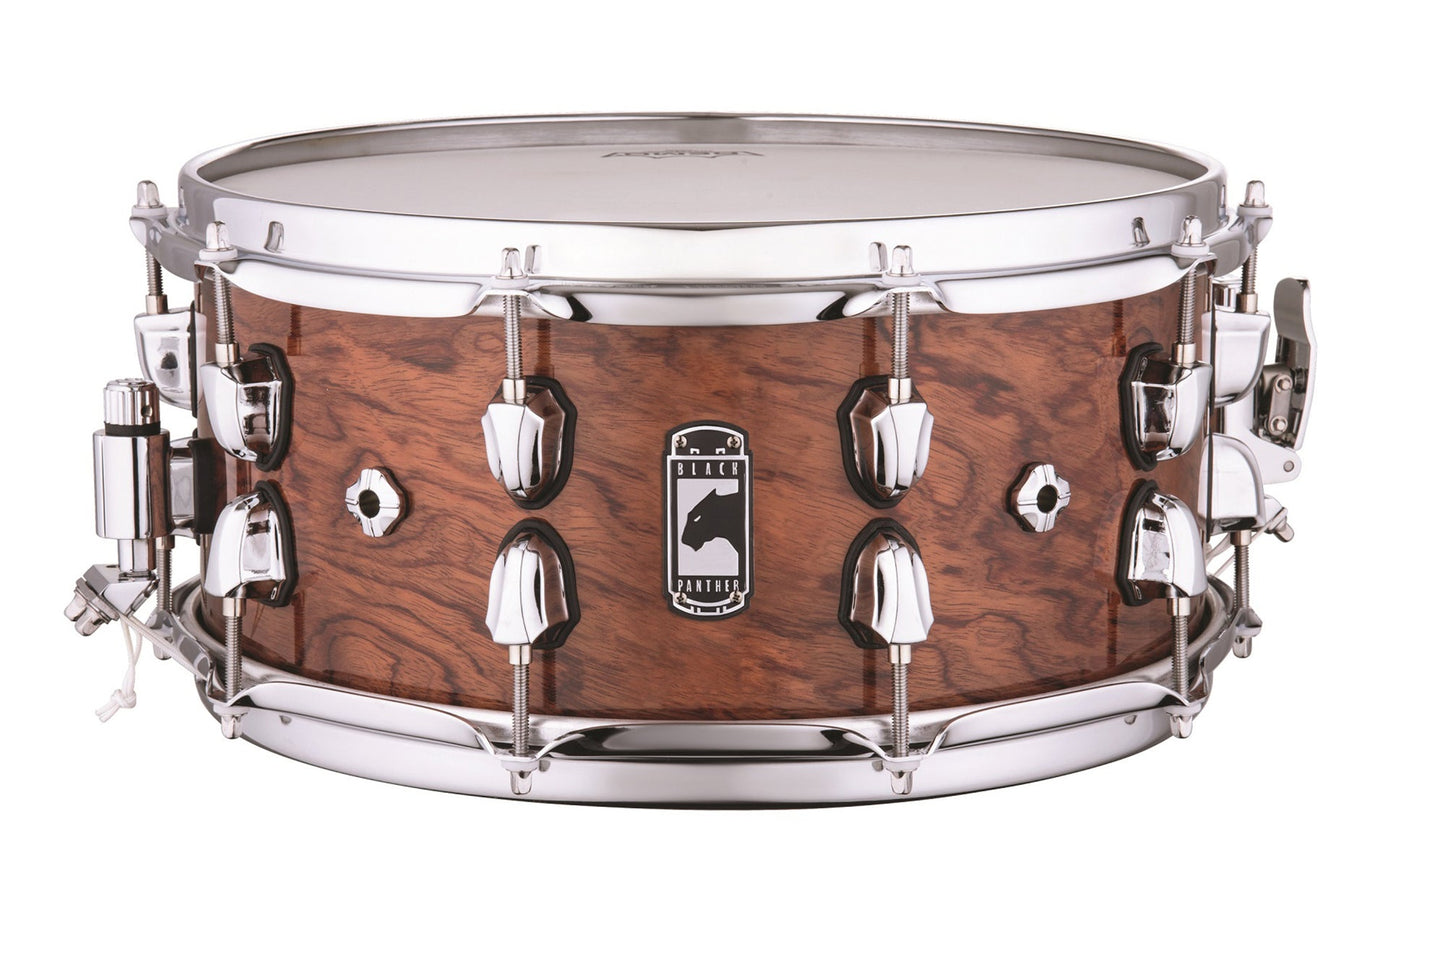 Mapex Black Panther Shadow Snare Drum - 14 x 6.5 inch - Natural